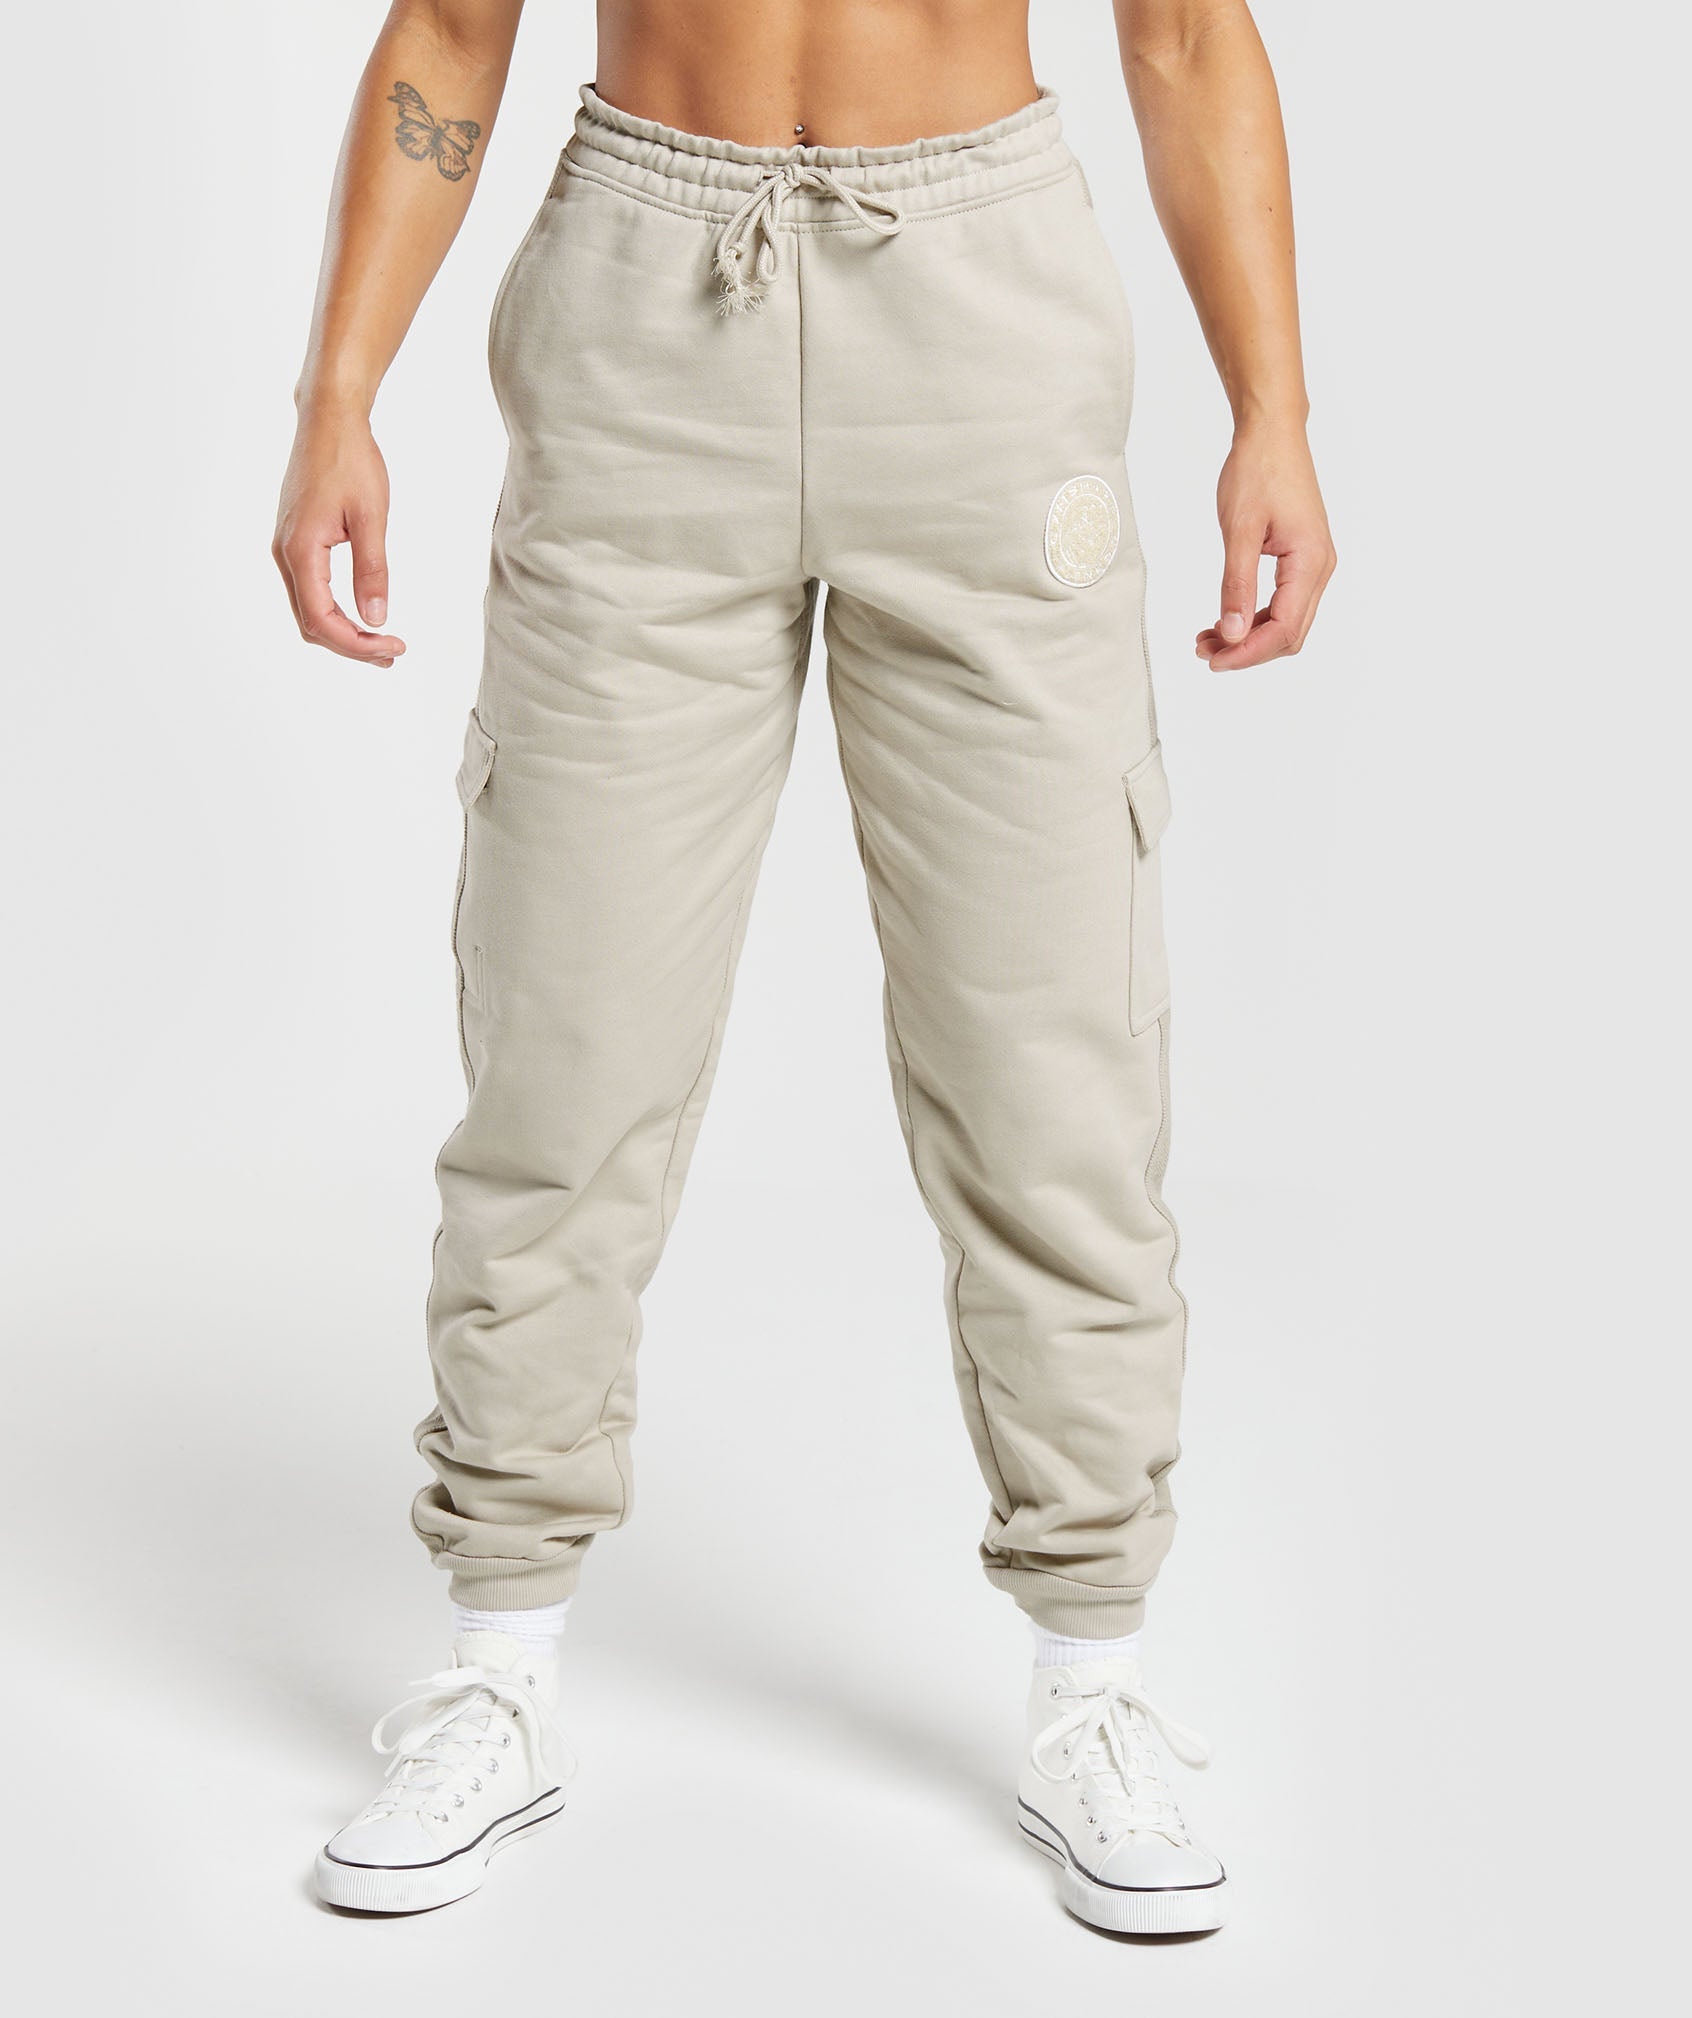 Legacy Joggers in Washed Stone Brown is out of stock